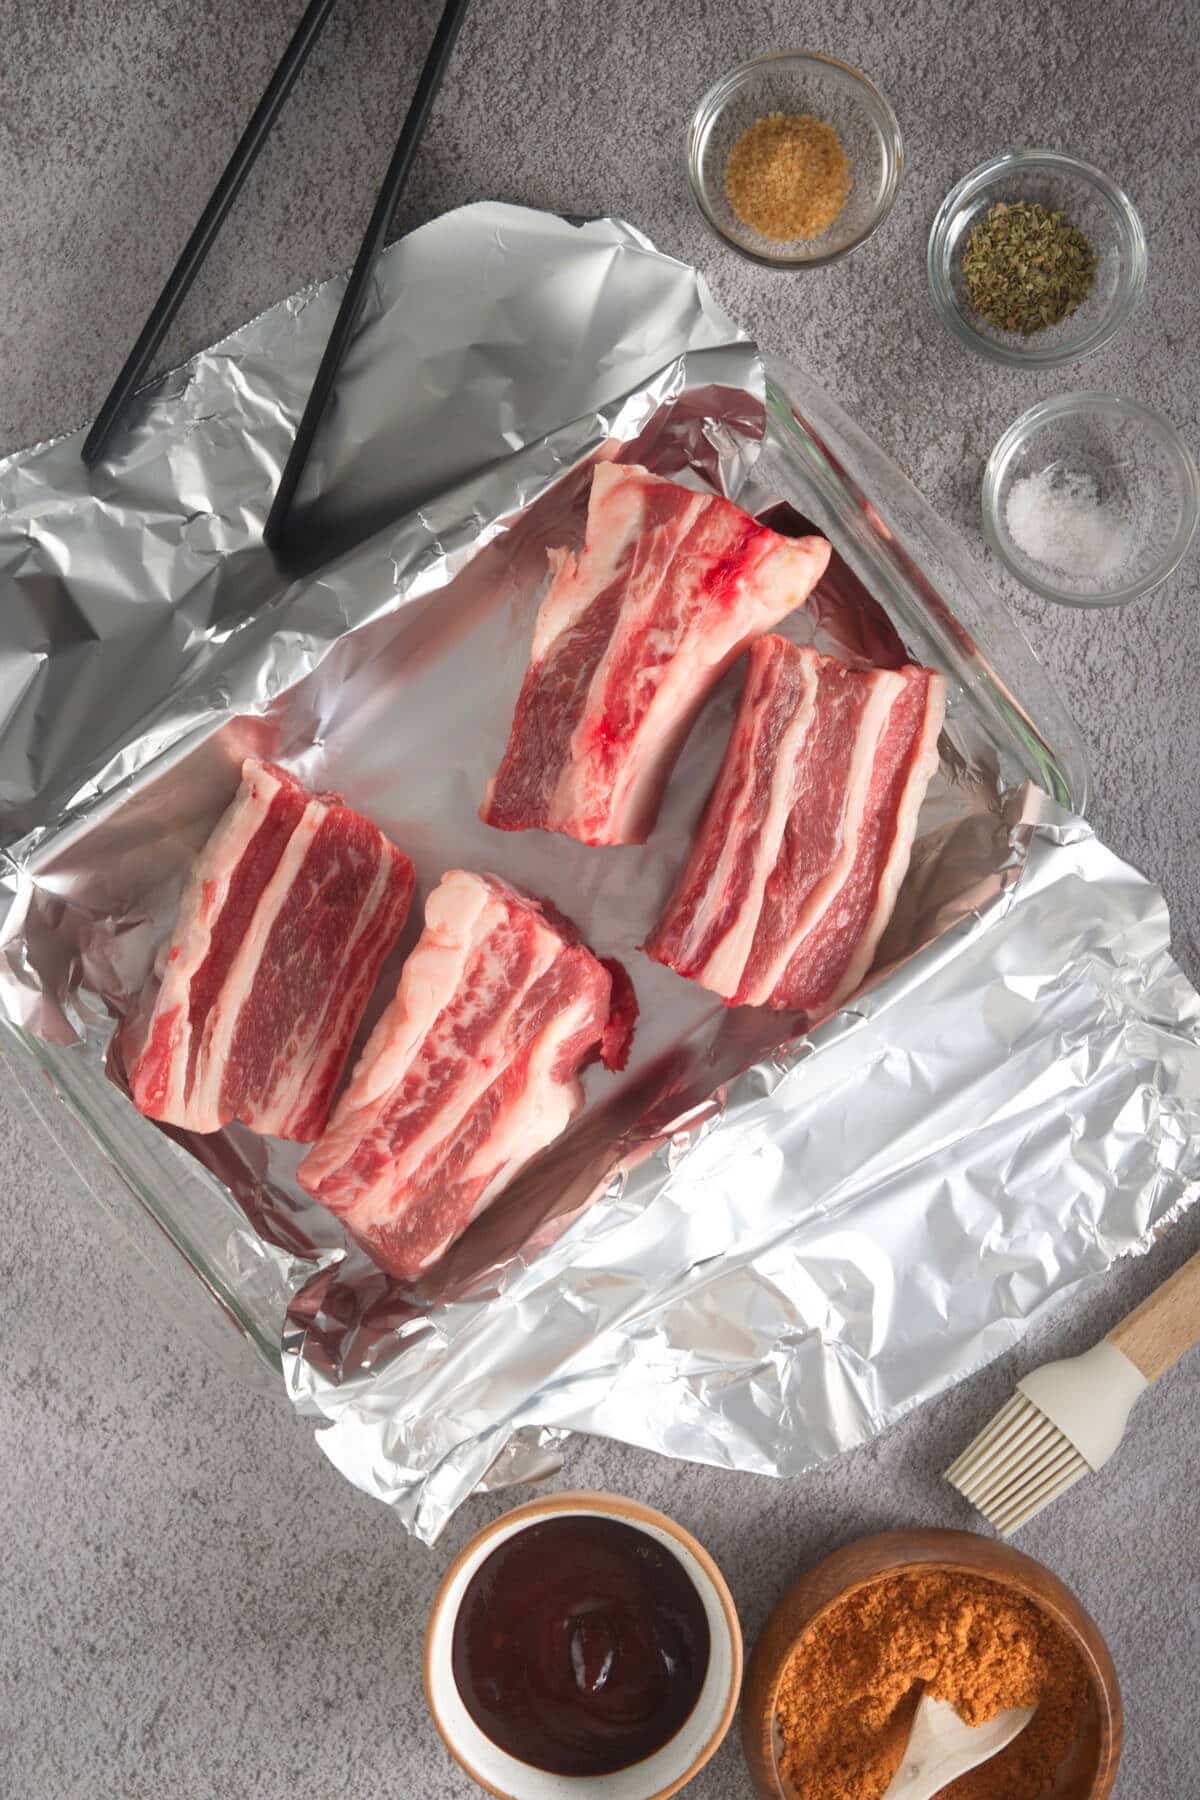 Raw bison short ribs in foil lined baking dish with spices on the side.